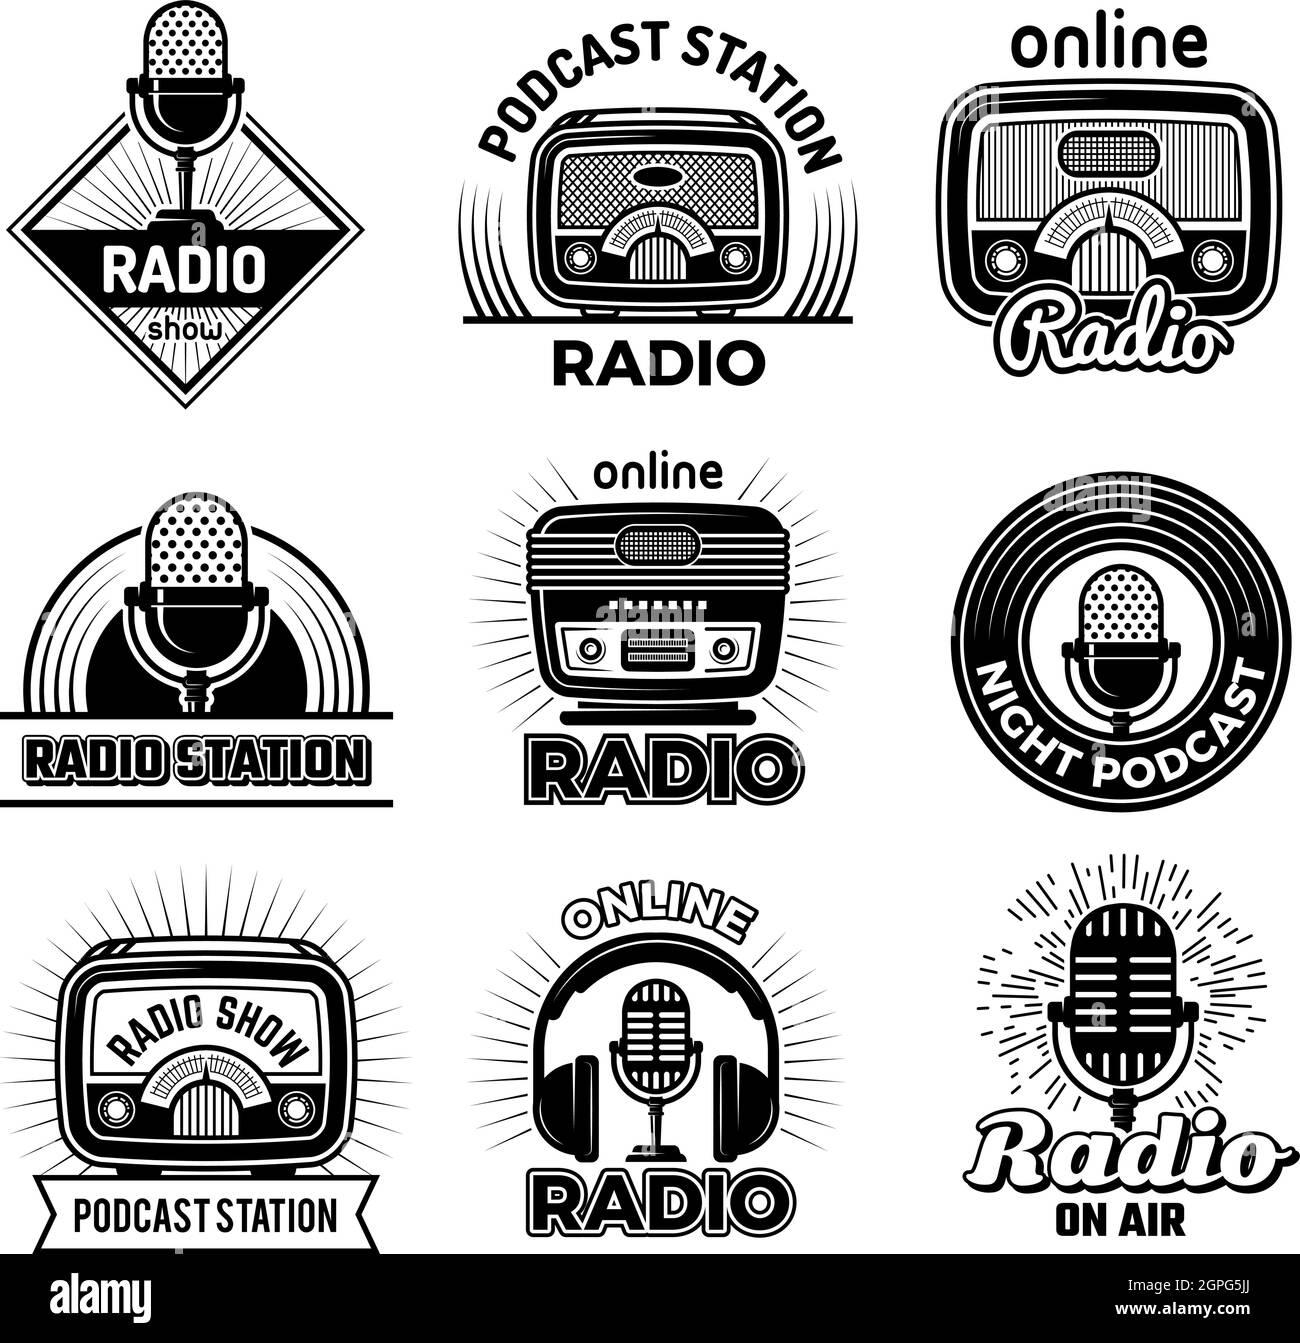 Radio badges. Music talking podcast air streaming show radio logos emblem  with headset and microphones vector illustrations Stock Vector Image & Art  - Alamy